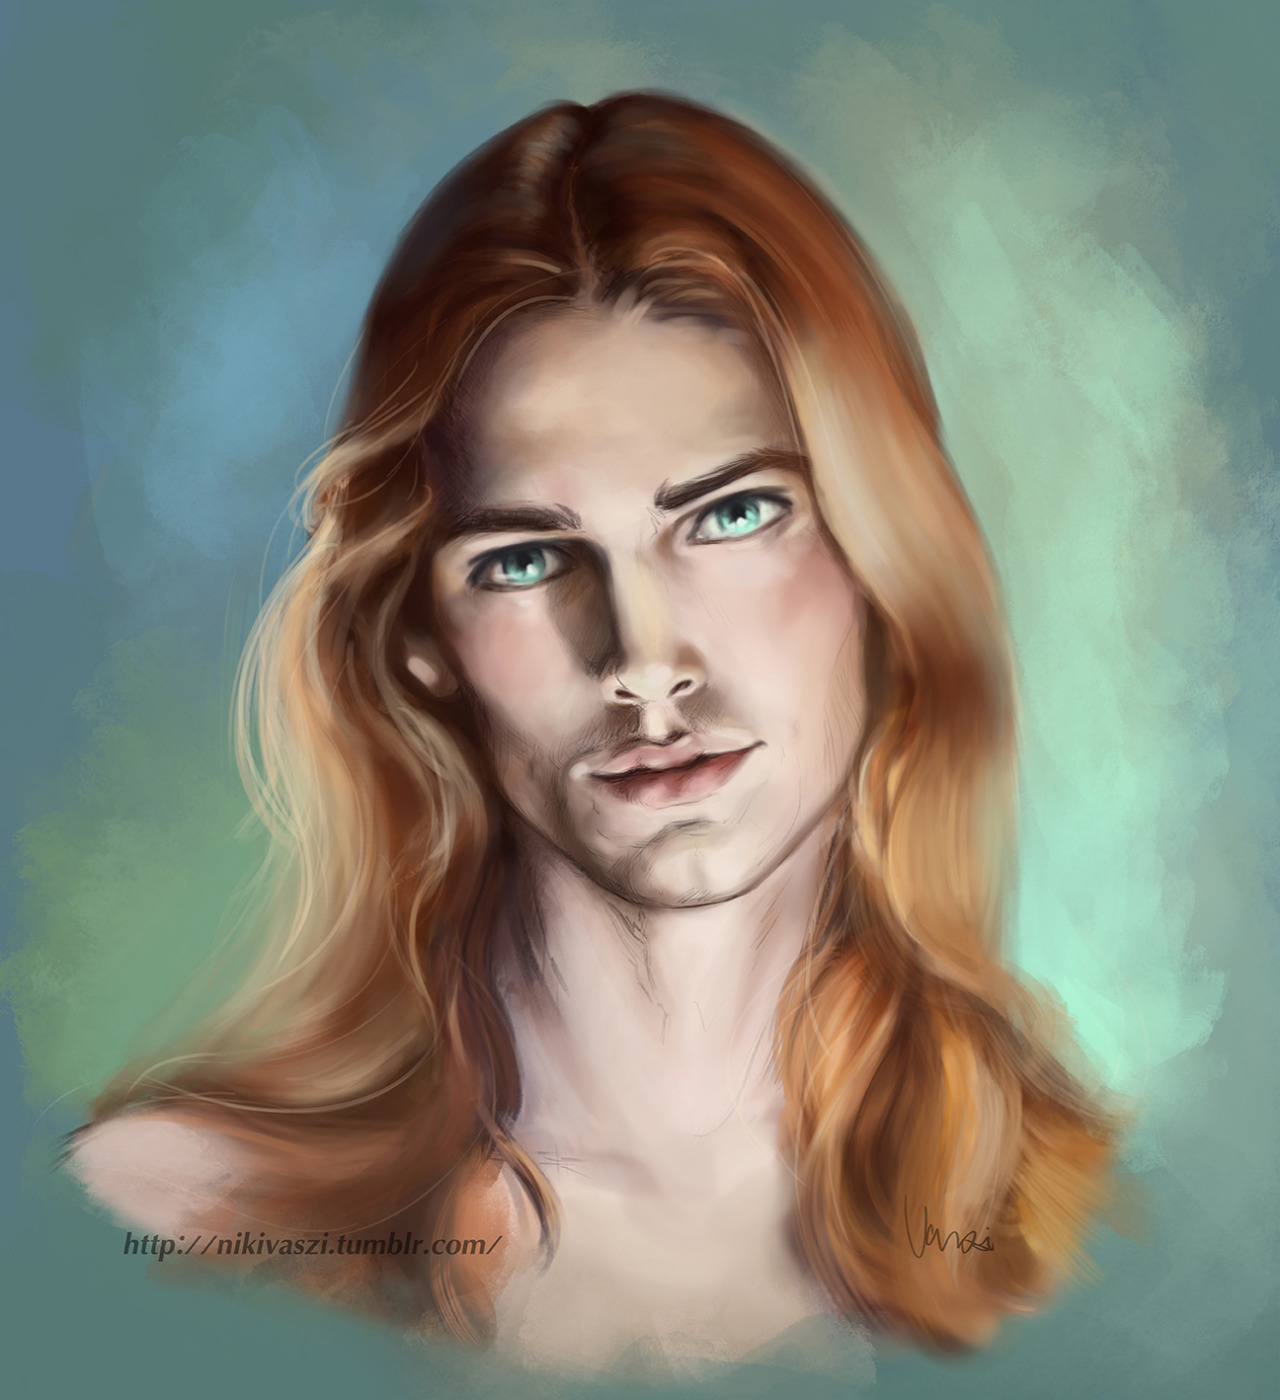 nikivaszi: Amel’s portrait from the book Prince Lestat and the Realms of Atlantis